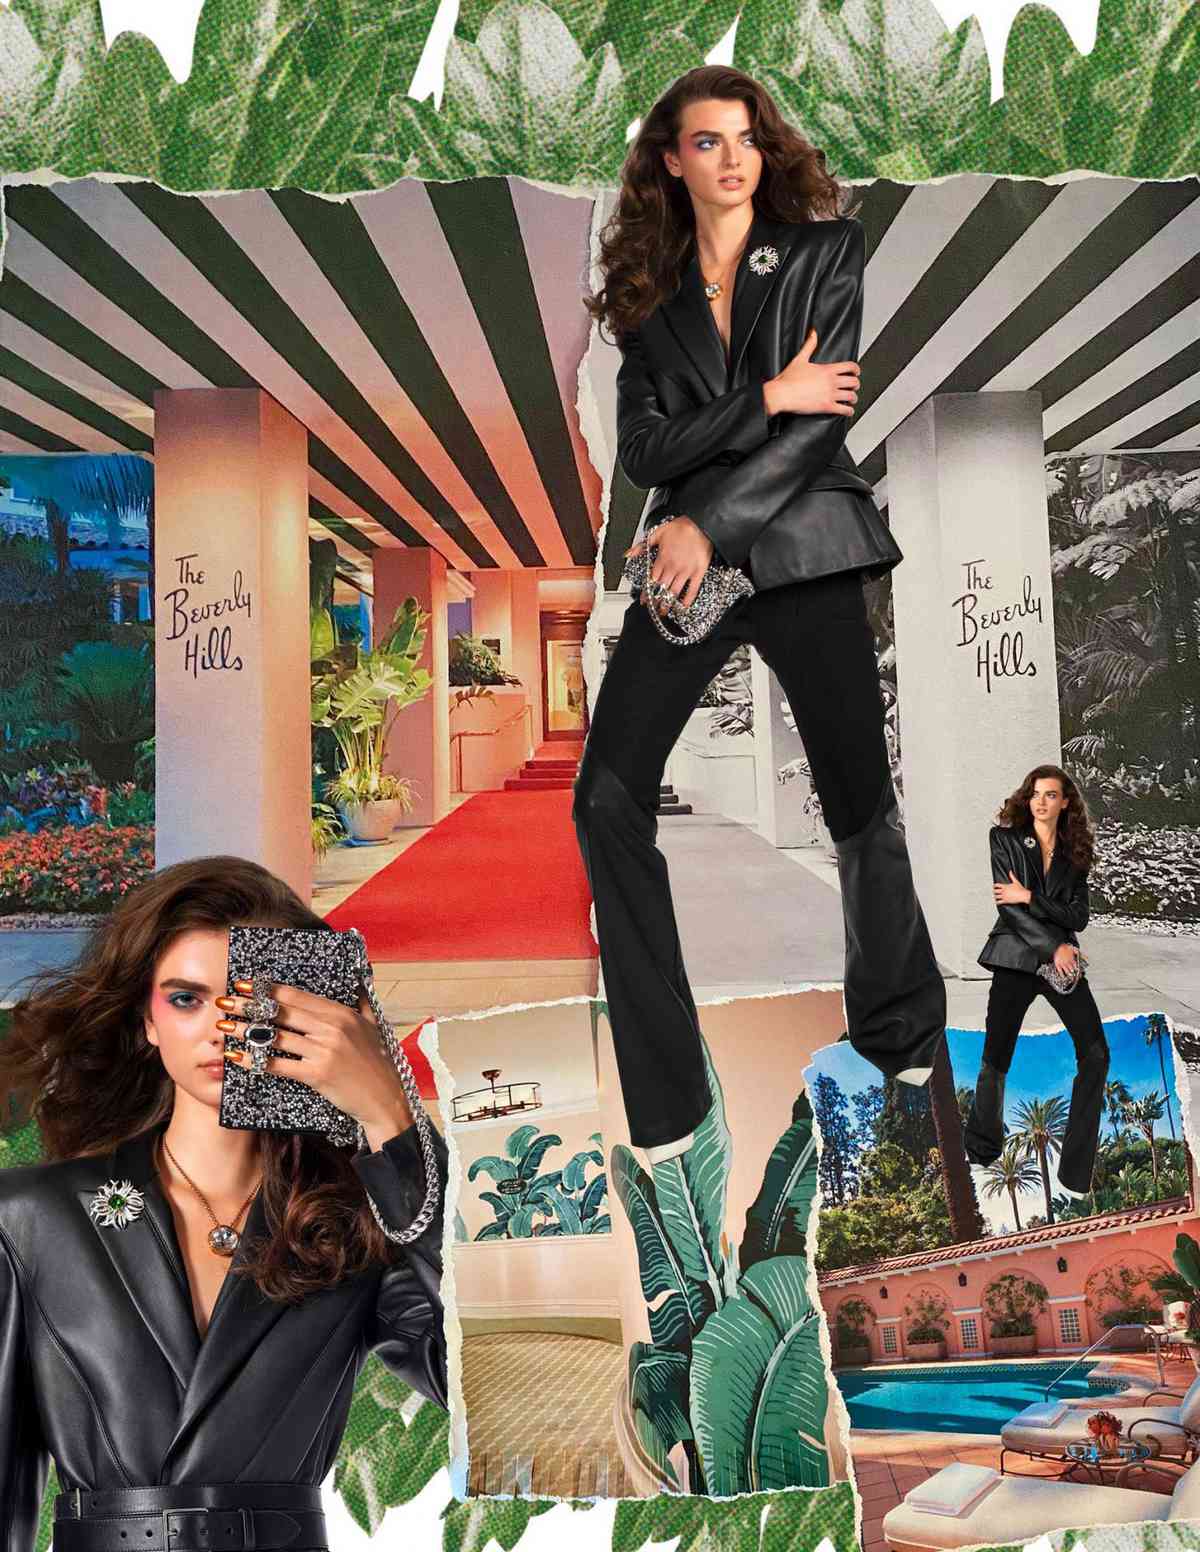 Photos of a model wearing a black pant suit, superimposed on photos of the Beverly Hills Hotel